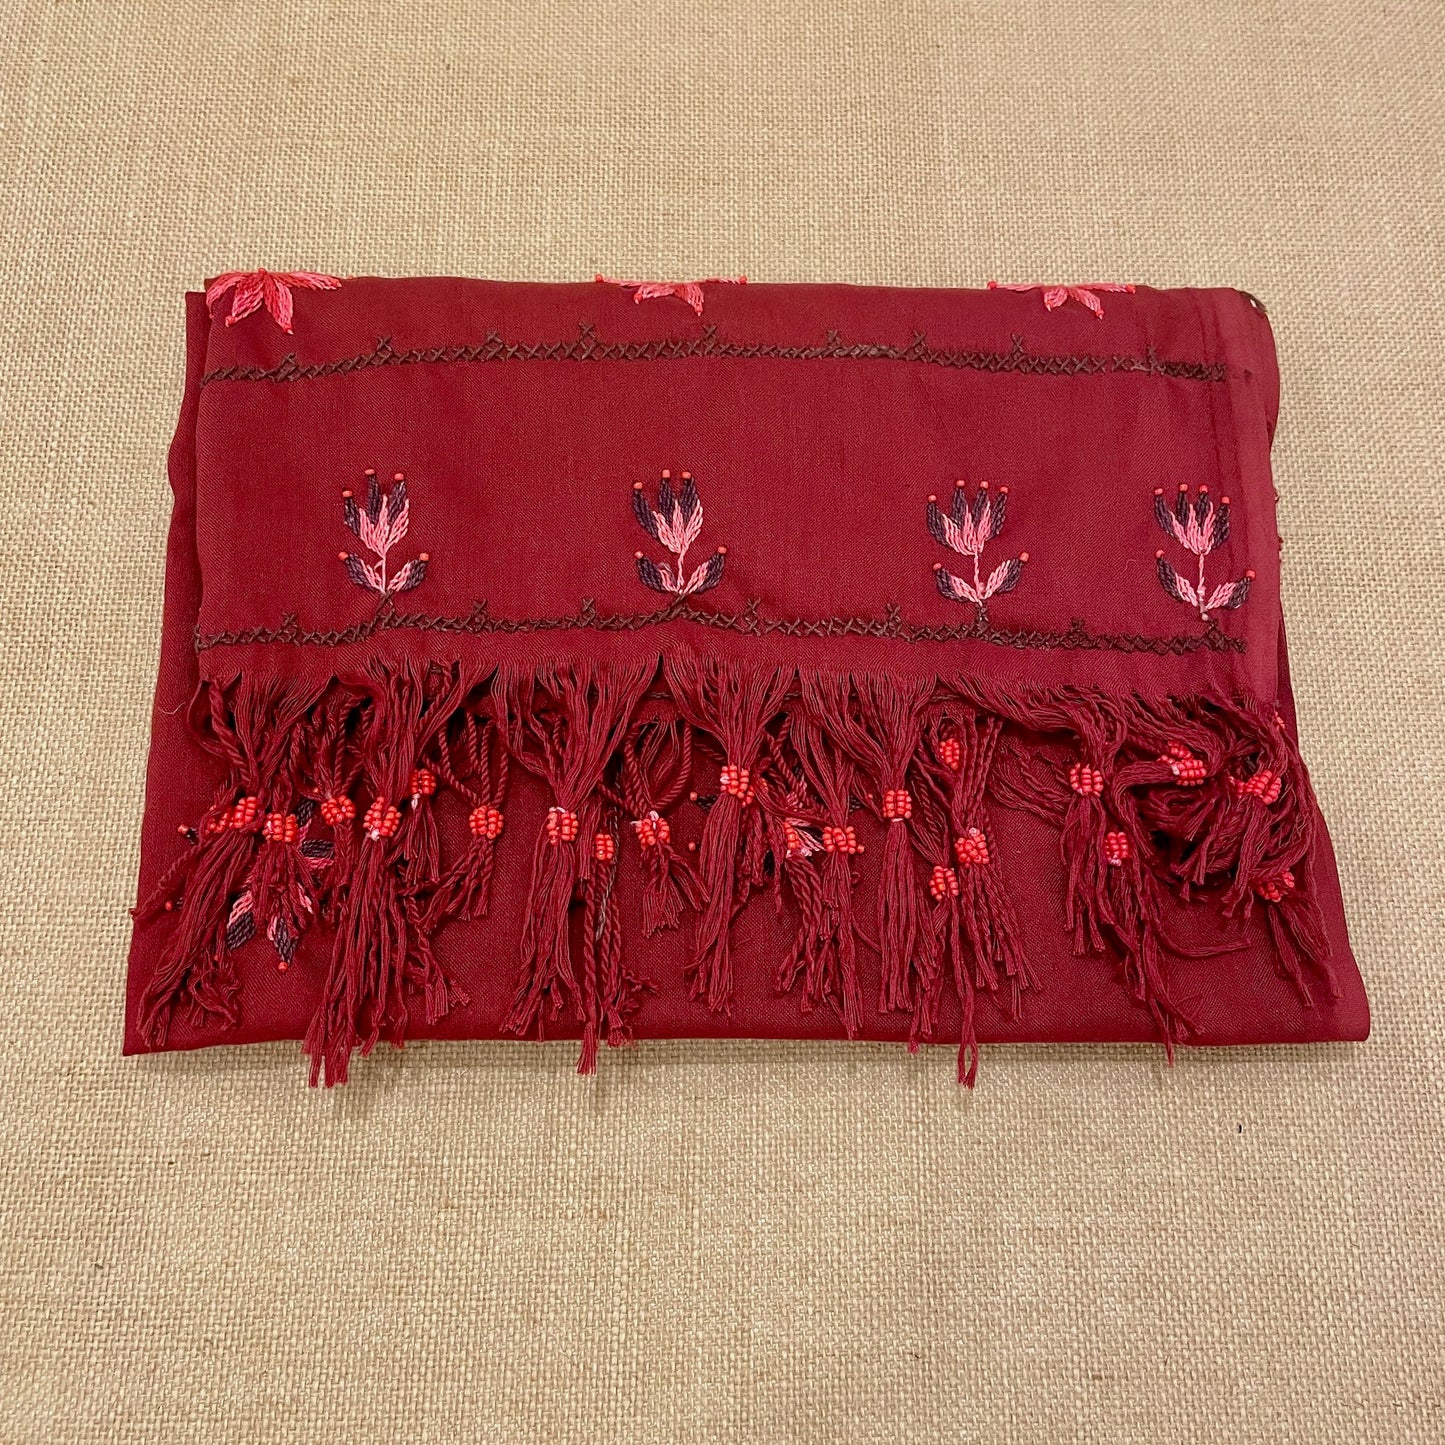 Bedouin Hand-embroidered Maroon Pashmina Scarf folded